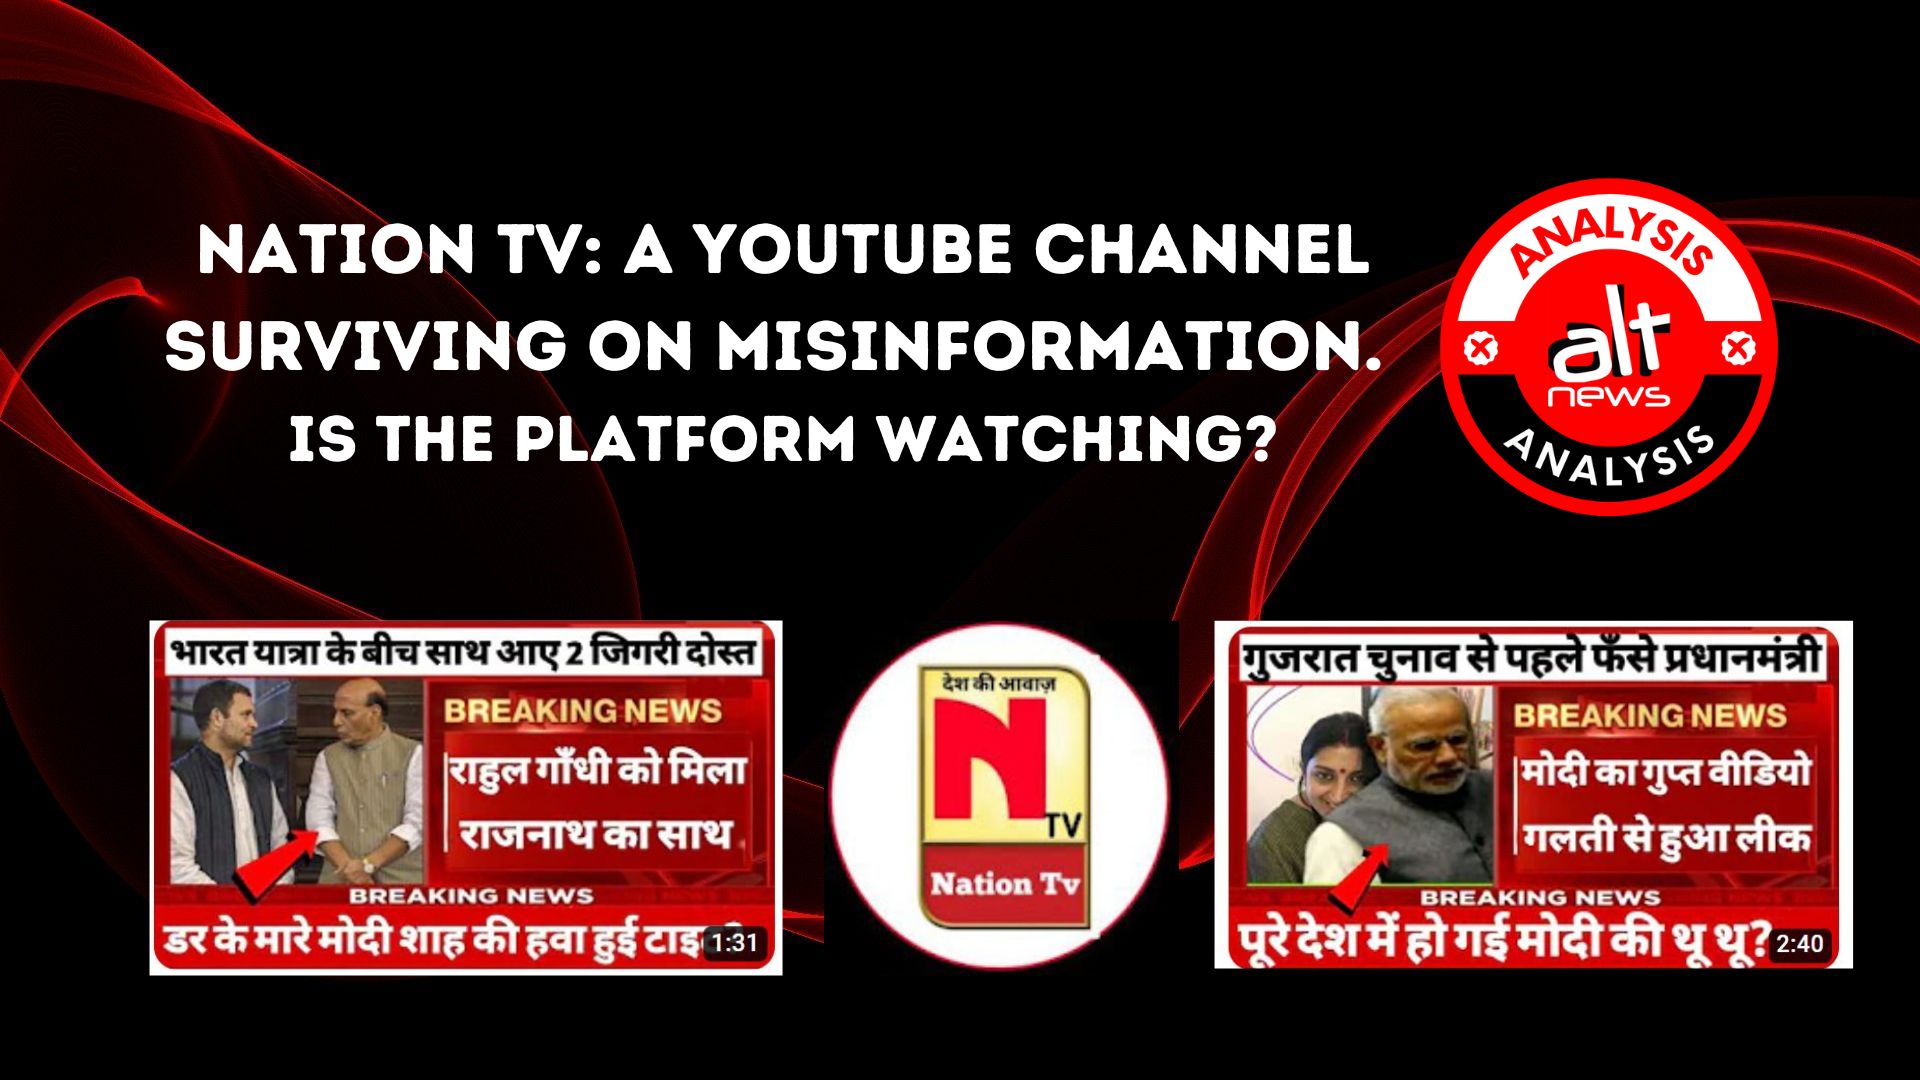 Nation TV: A misinformation factory on YouTube targeting BJP with false and outrageous claims - Alt News